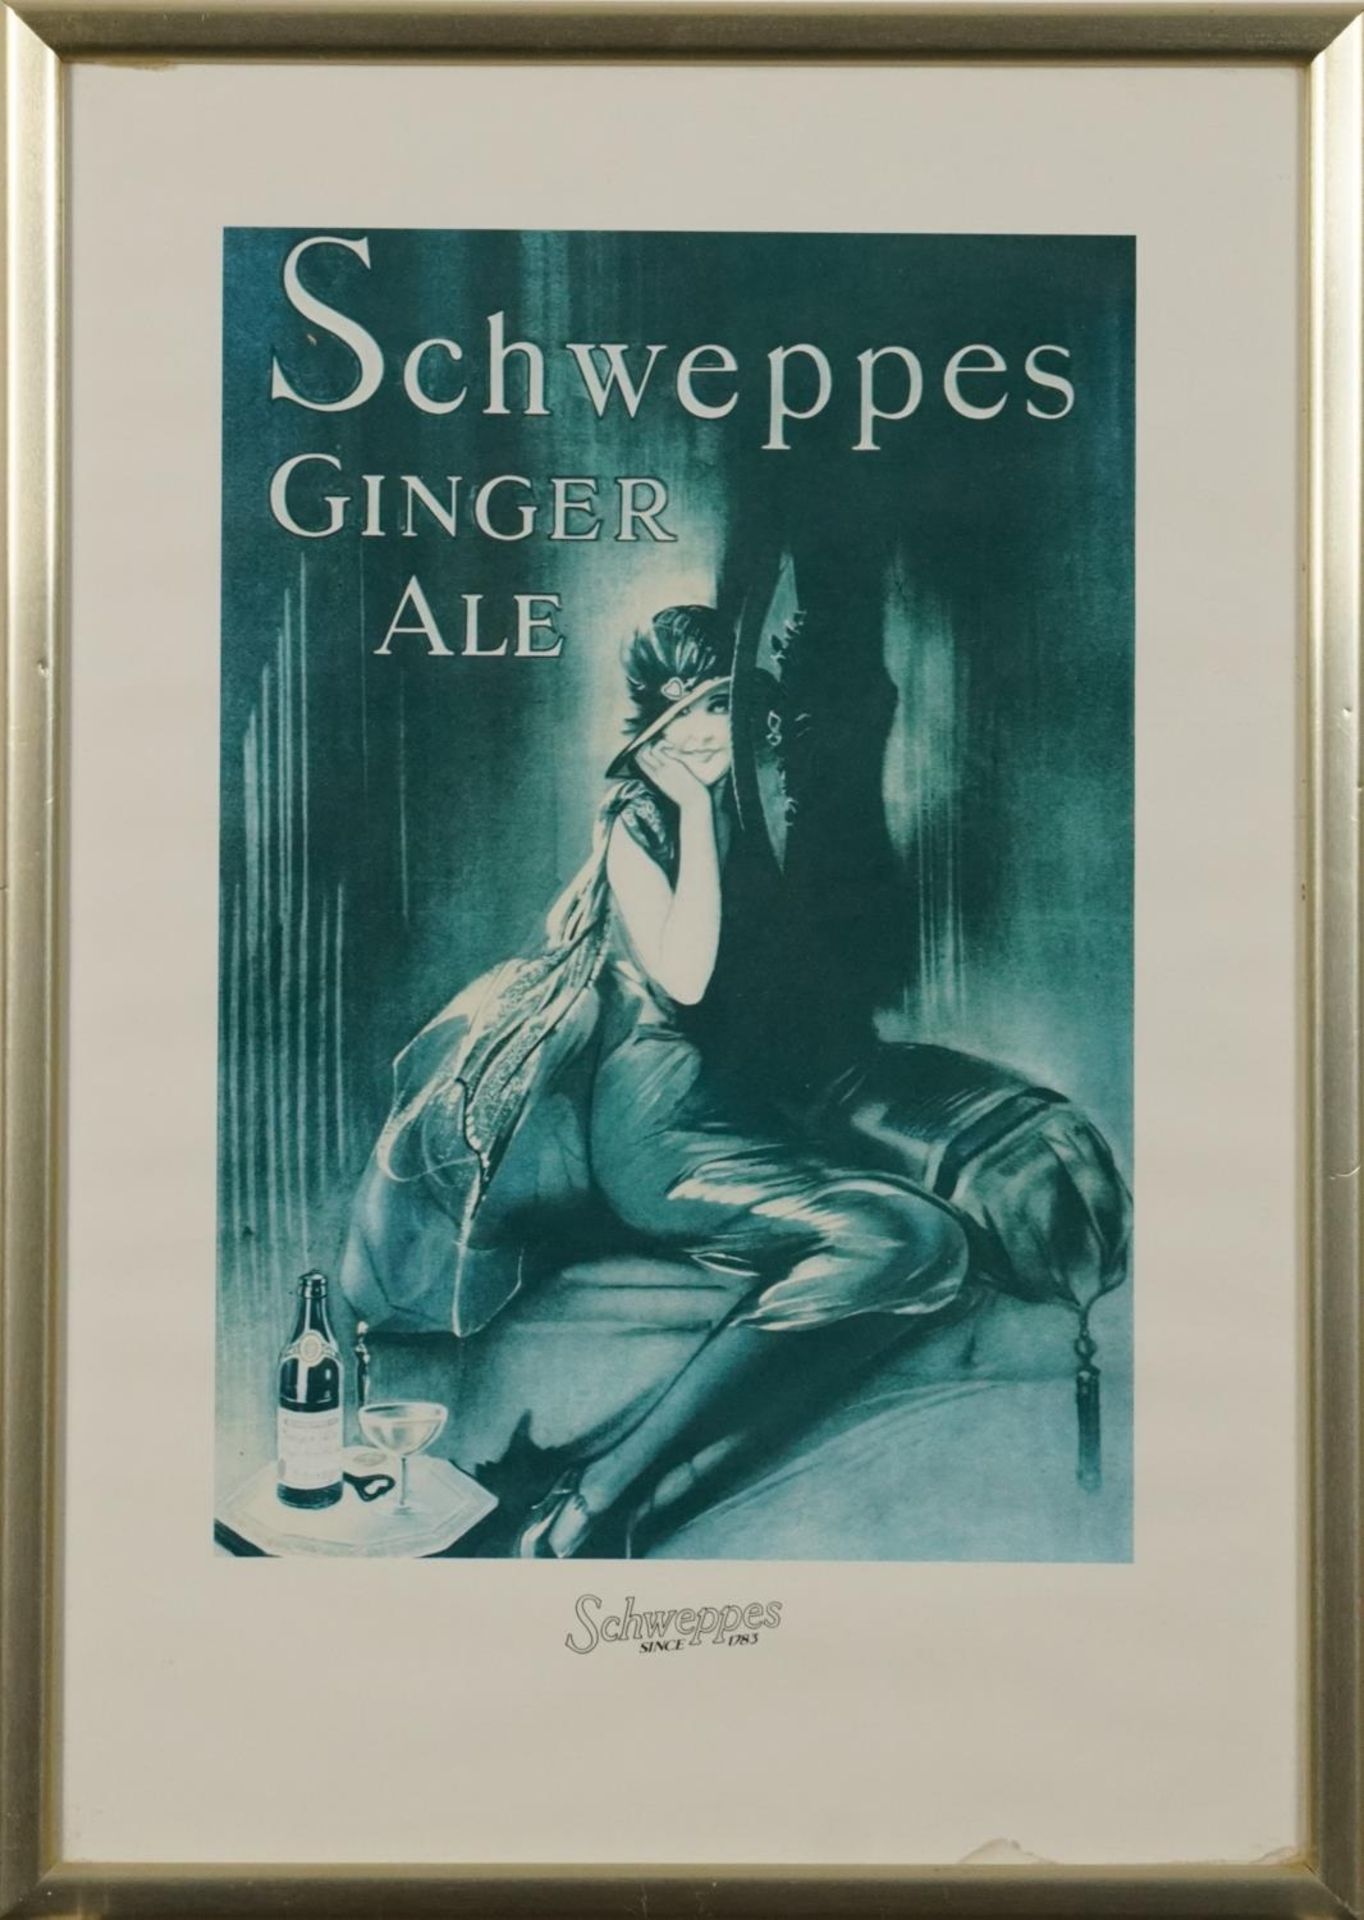 Schweppes, Cider, Tonic Water, Ginger Ale and Lemon Squash, set of six posters, framed and glazed, - Image 19 of 20